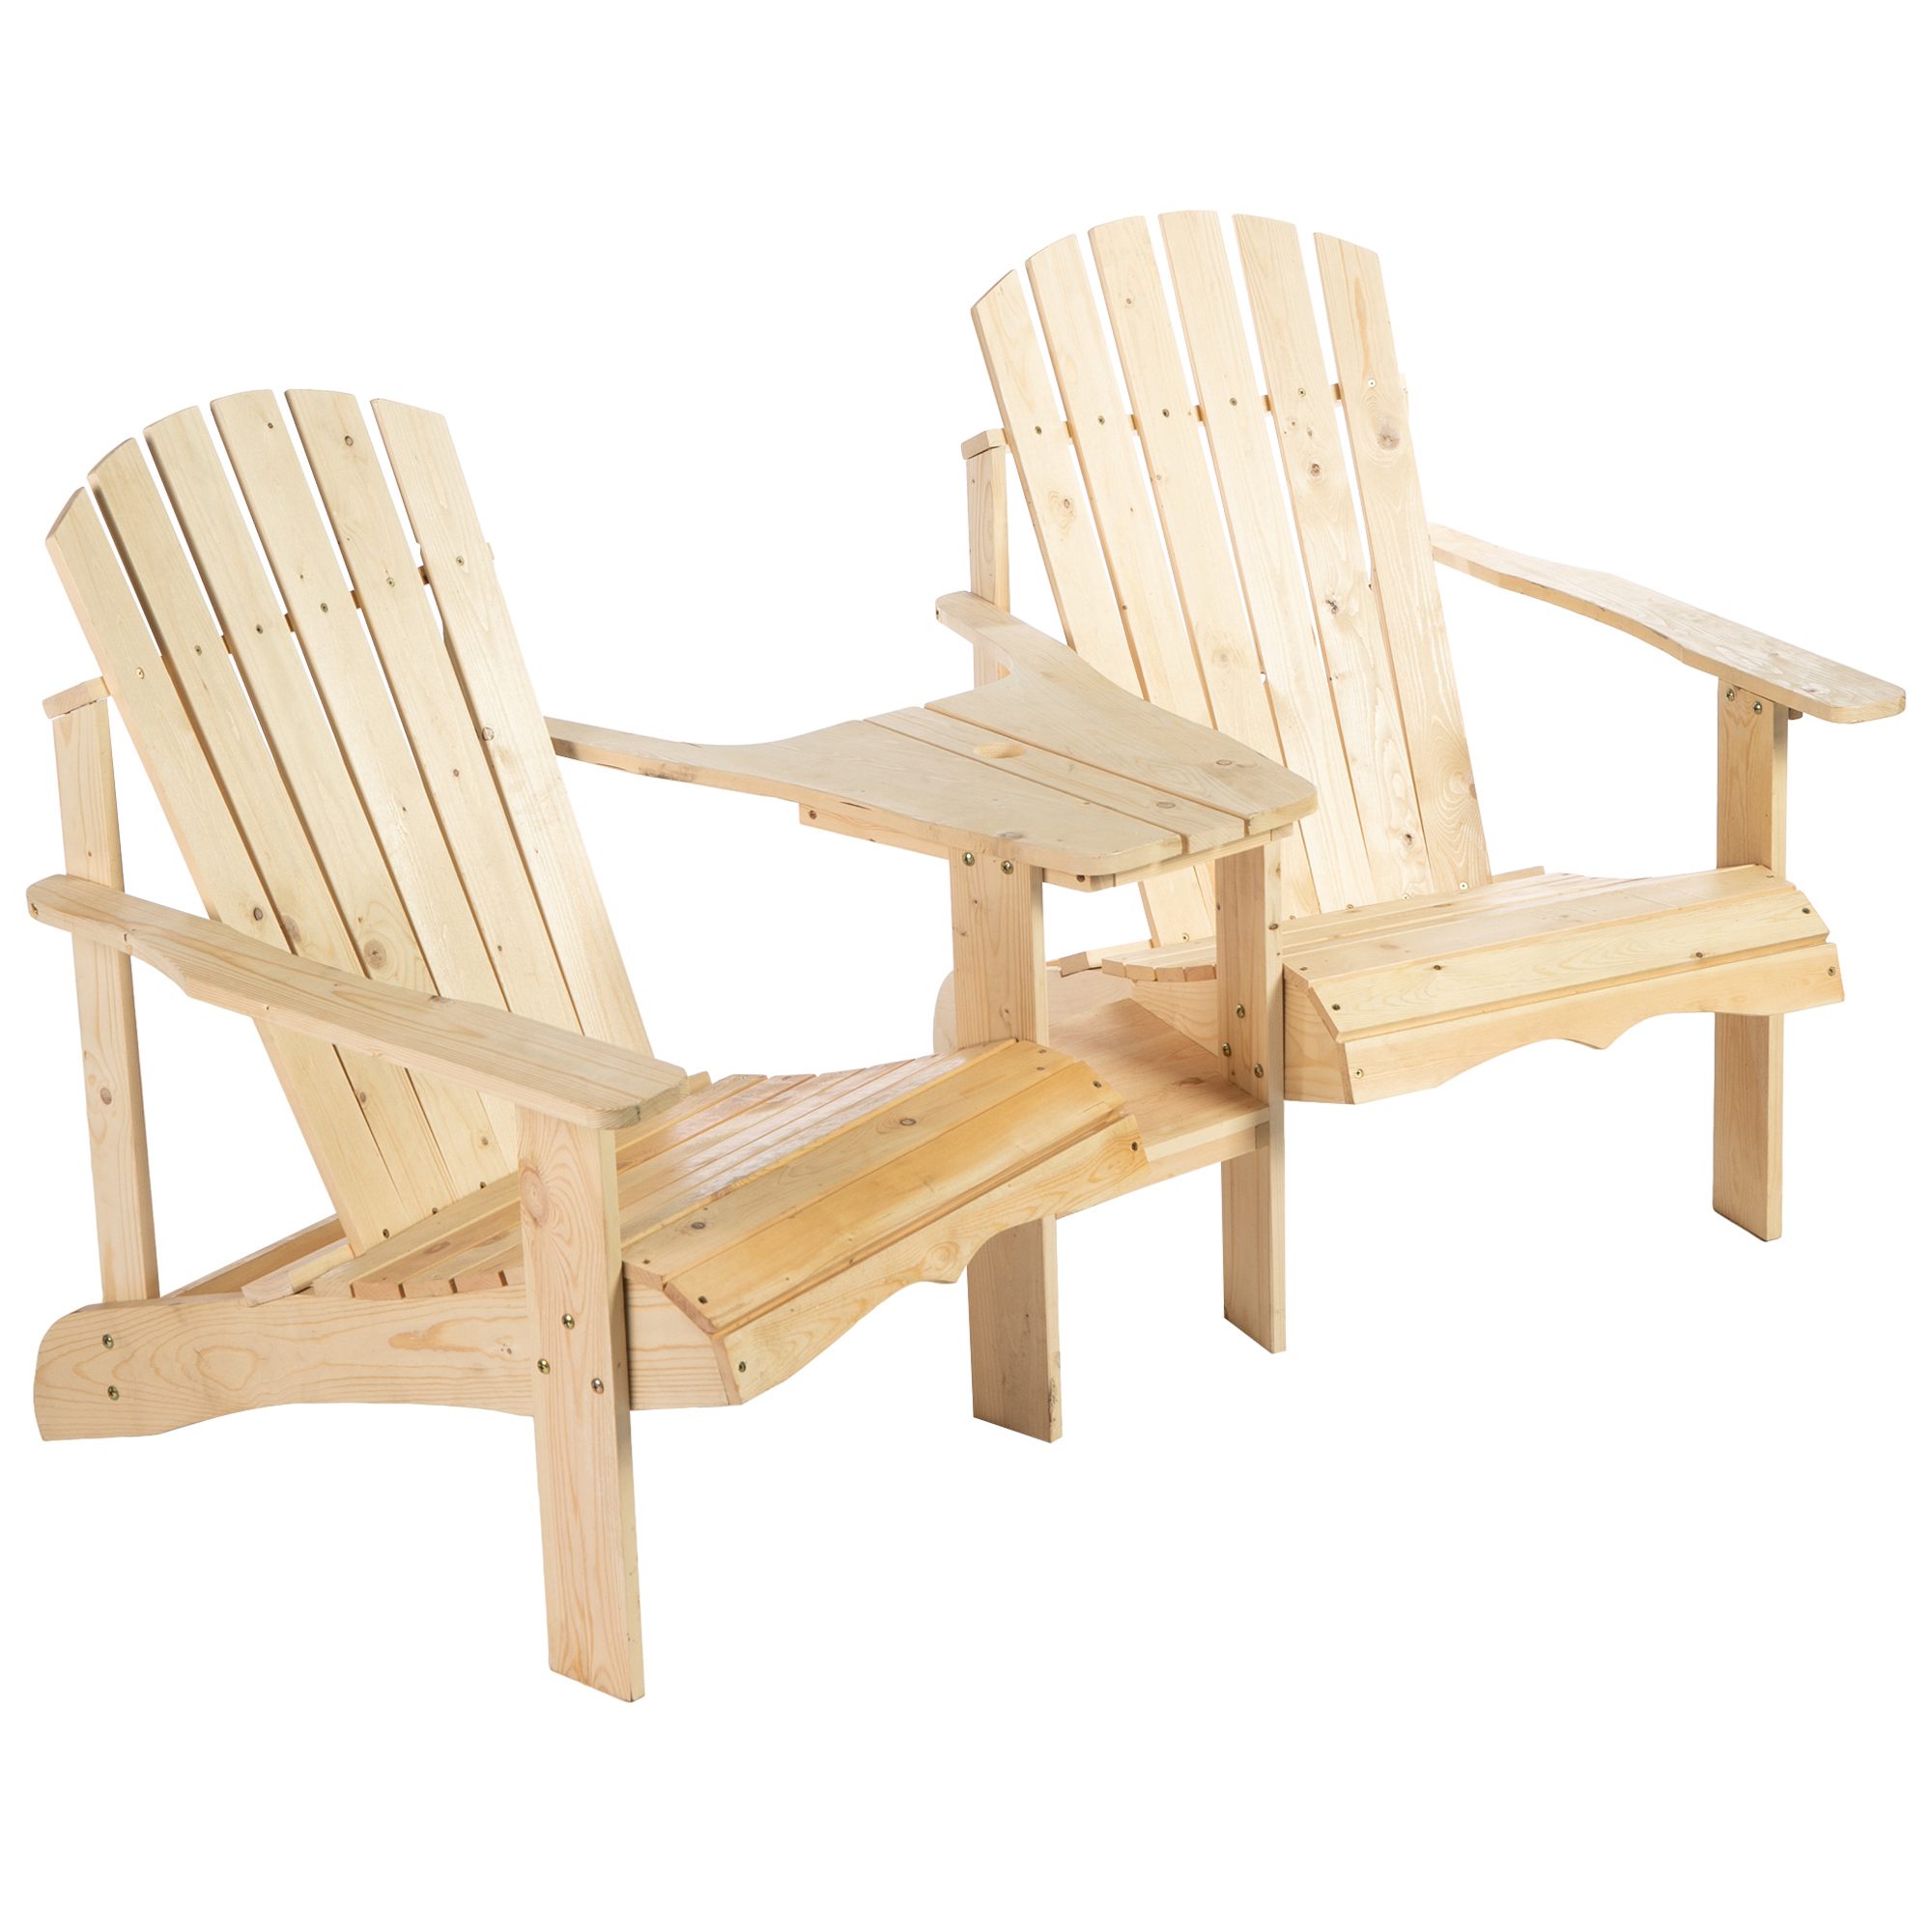 Outsunny Outdoor Wood Adirondack Chair with Coner Table Patio Reclined Tete-A-Tete Bench